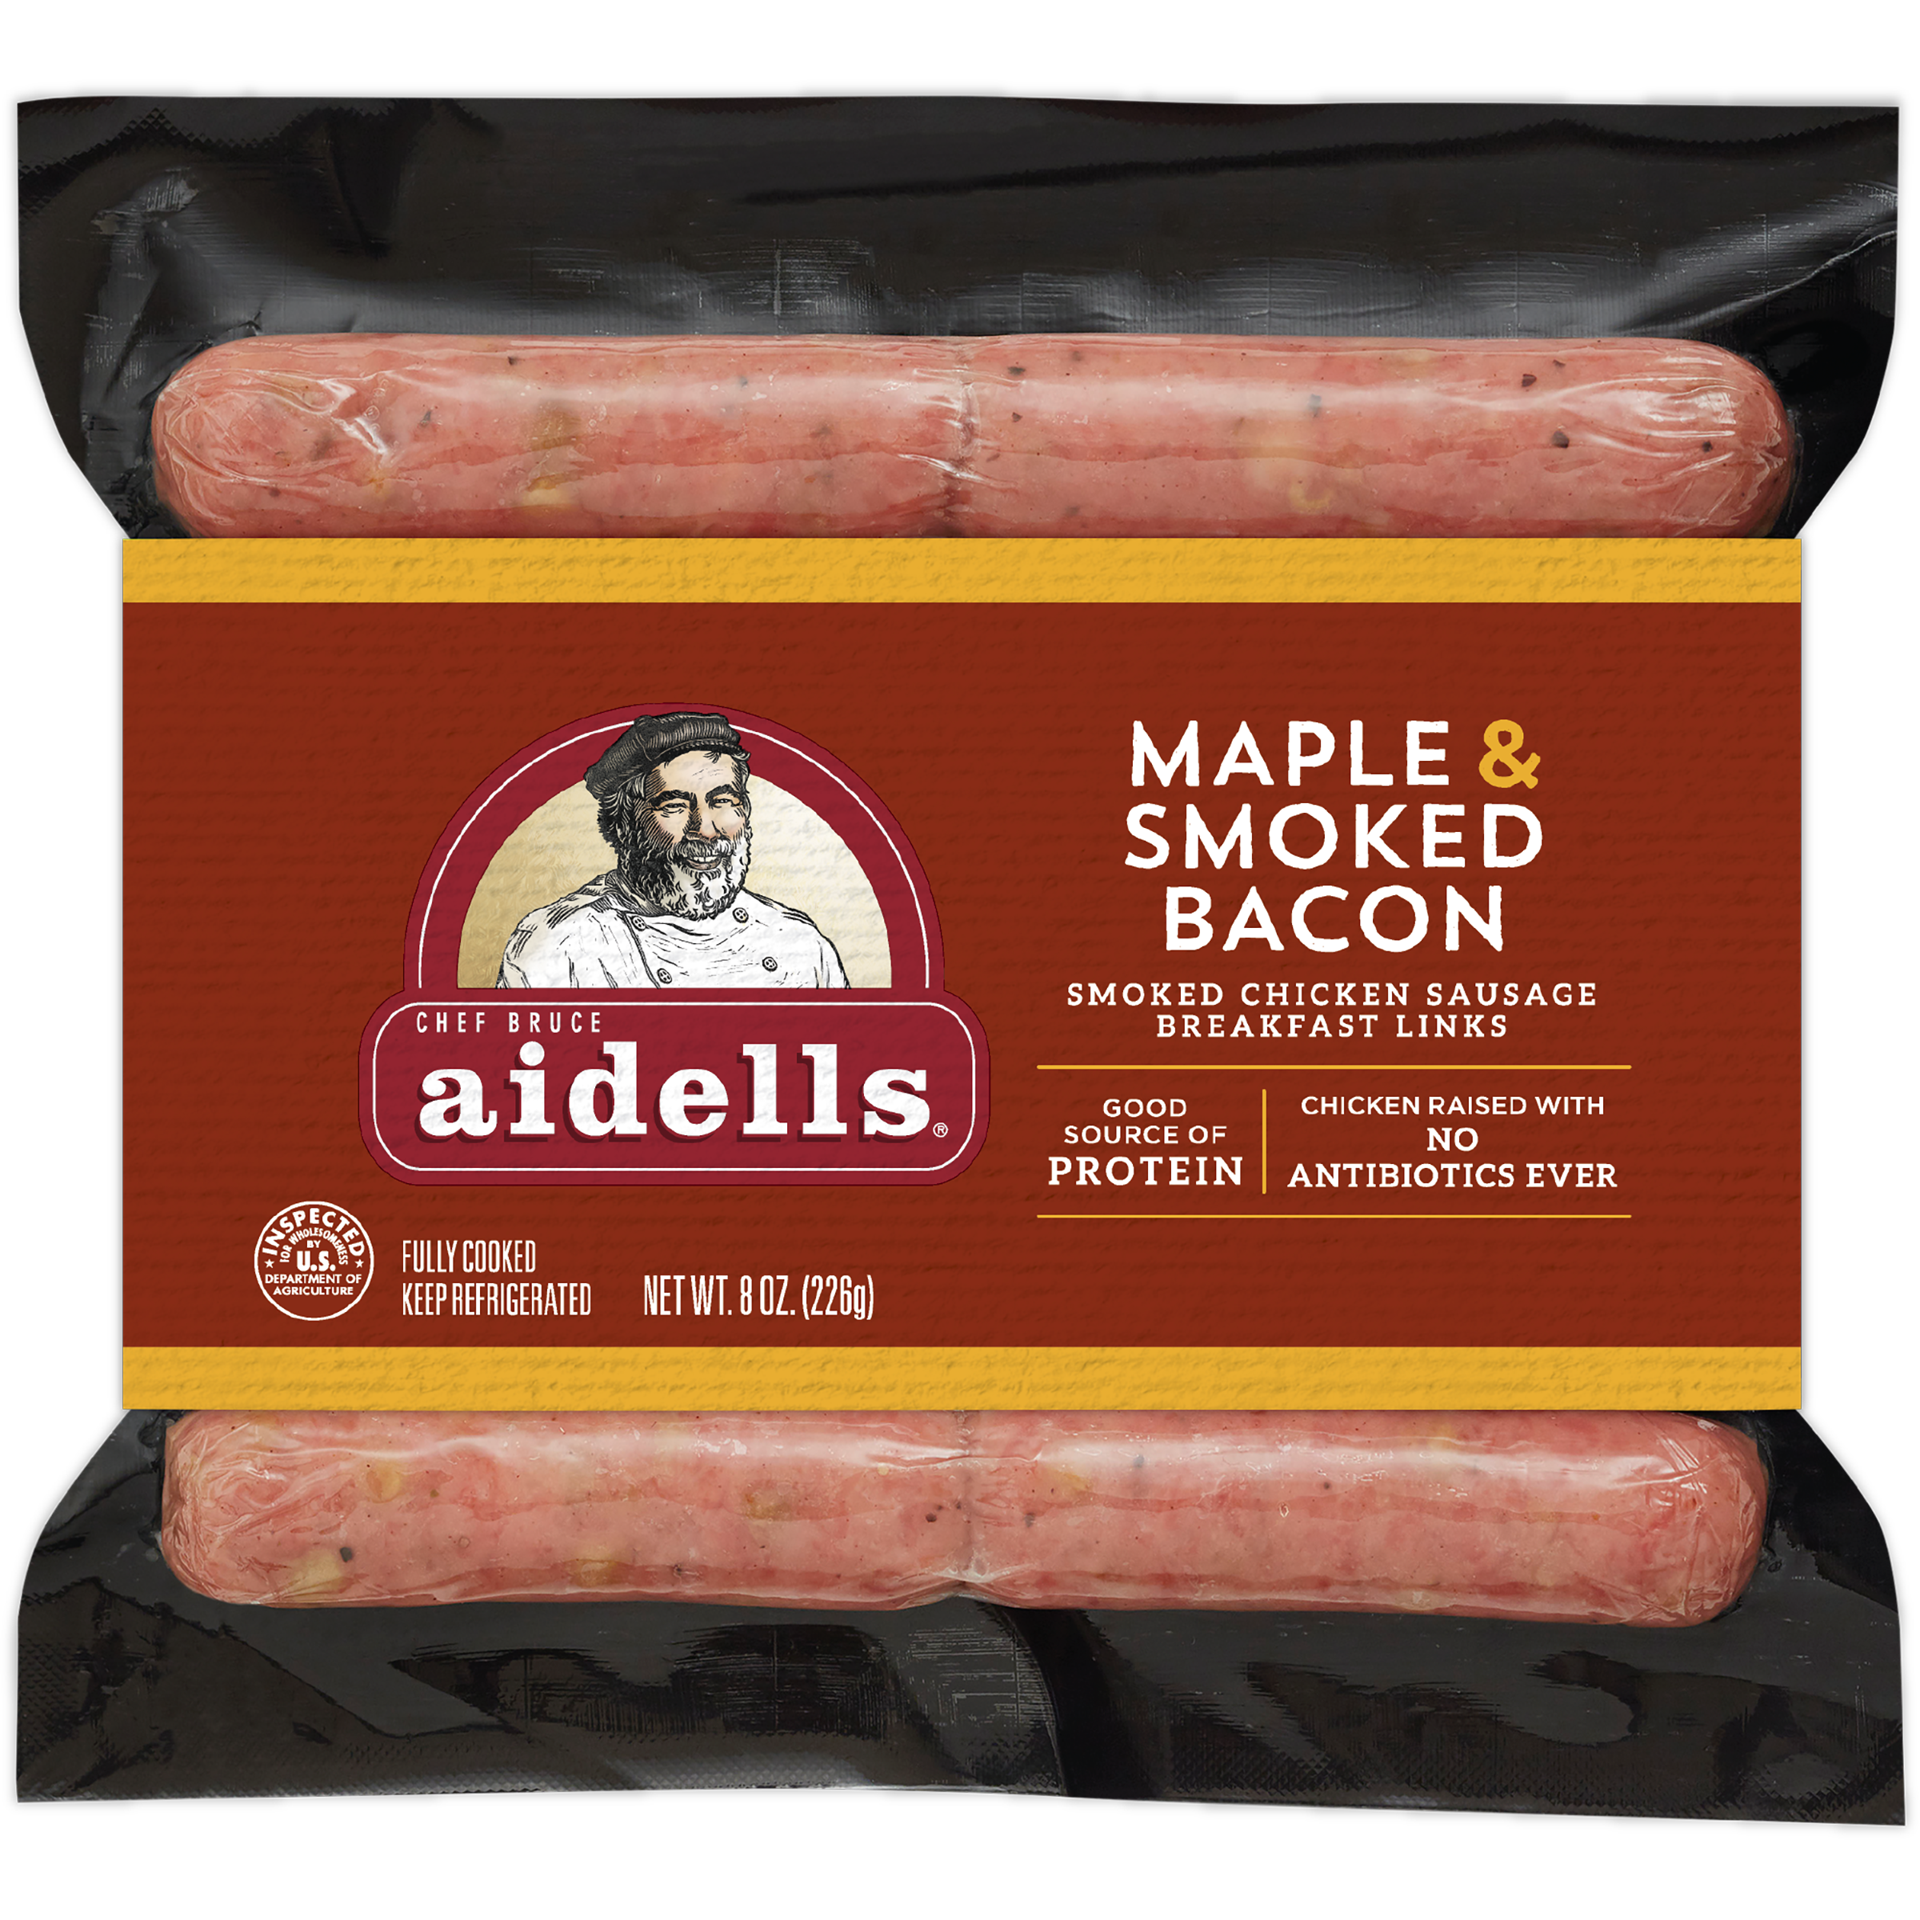 slide 1 of 6, Aidells Smoked Chicken Sausage Breakfast Links, Maple & Smoked Bacon, 8 oz. (10 Fully Cooked Links), 10 ct; 8 oz